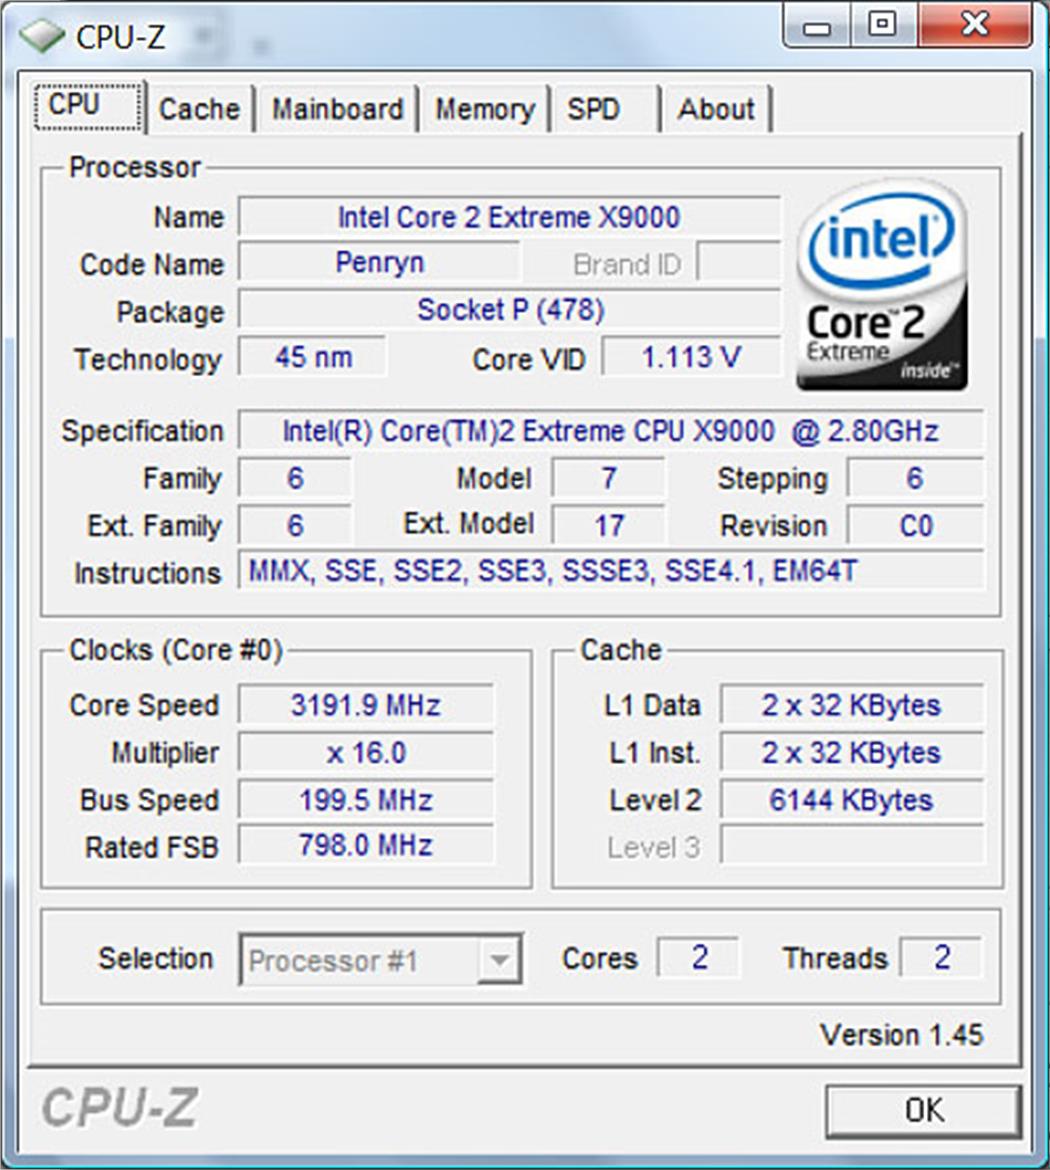 Intel Core 2 Extreme Mobile X9000, Mobile Penryn Speed